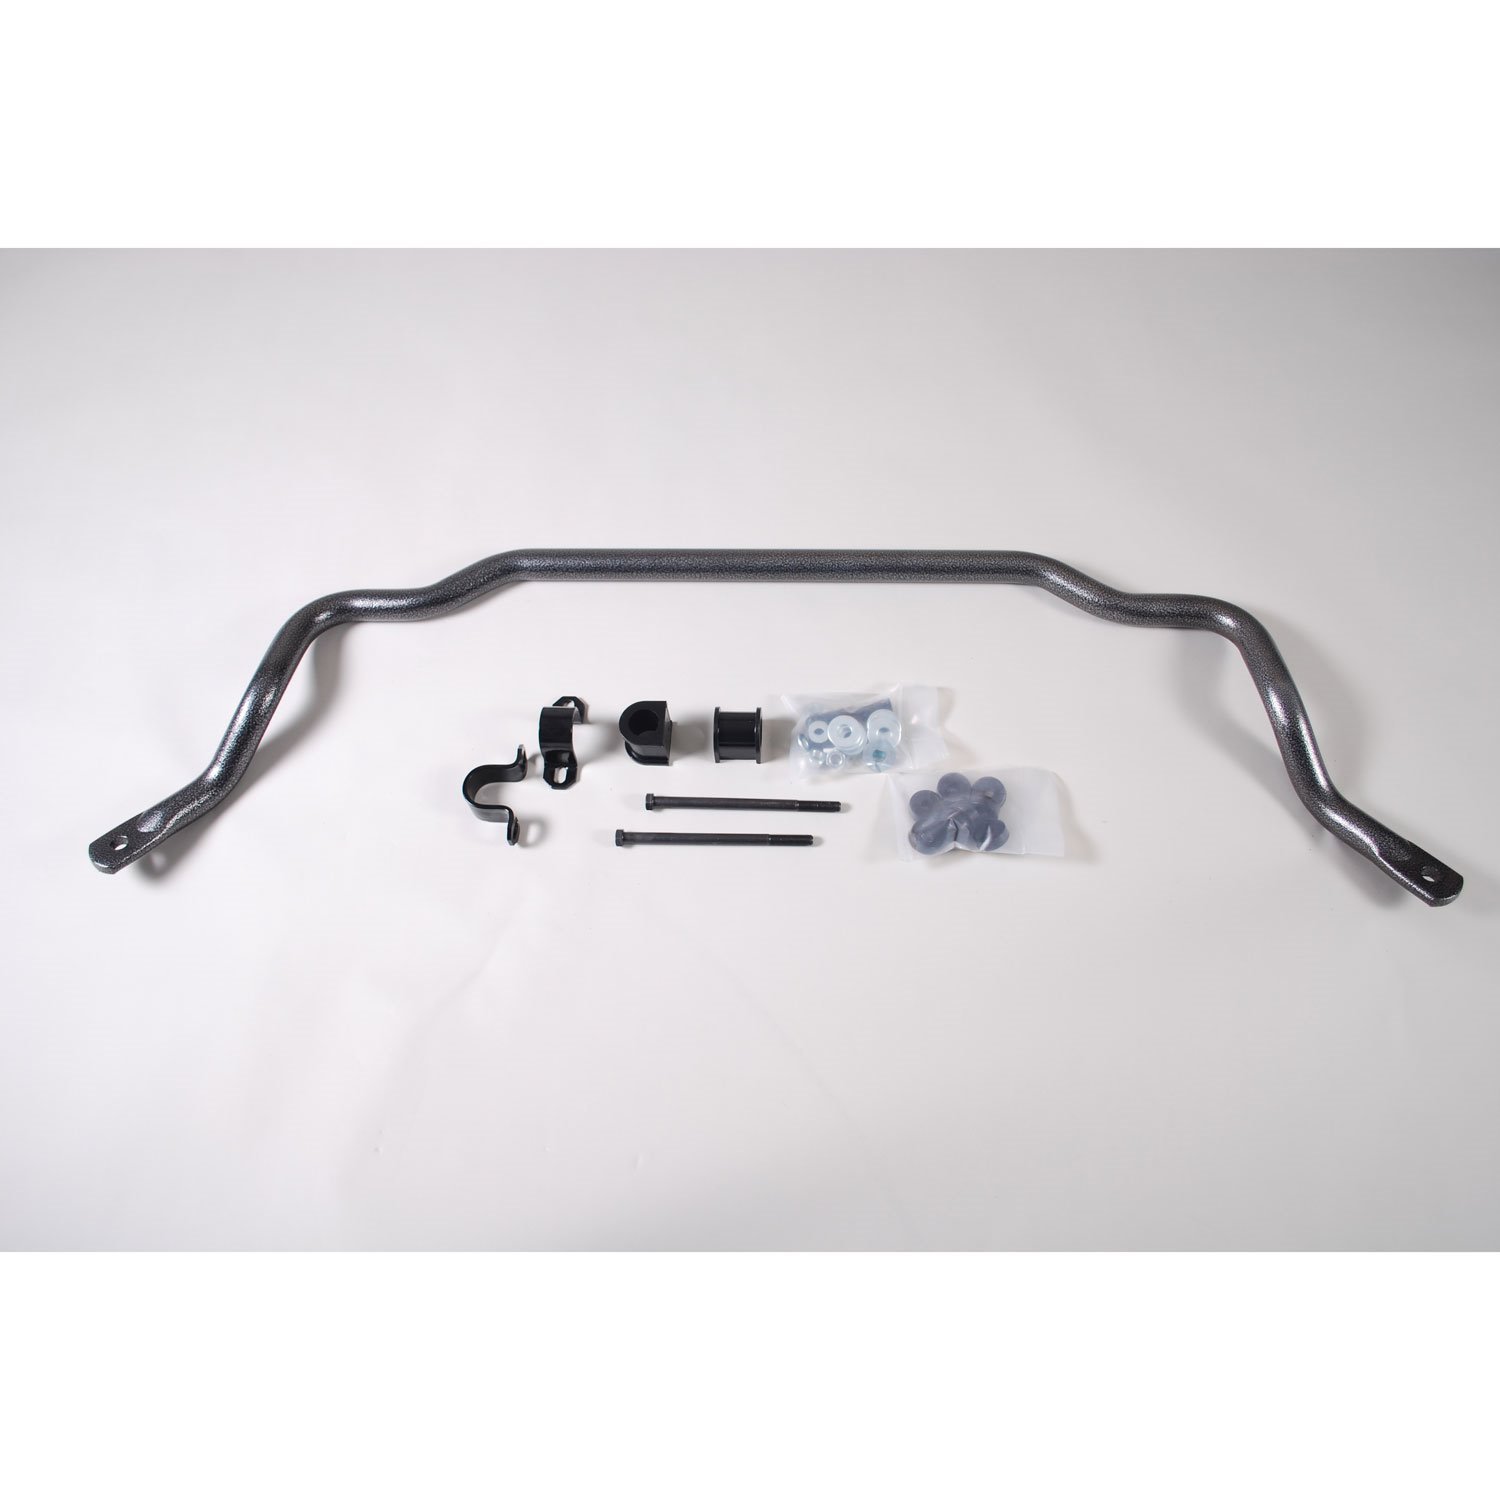 Front Sway Bar for 2003-2015 Chevy/GMC Express/Savana G2500/G3500